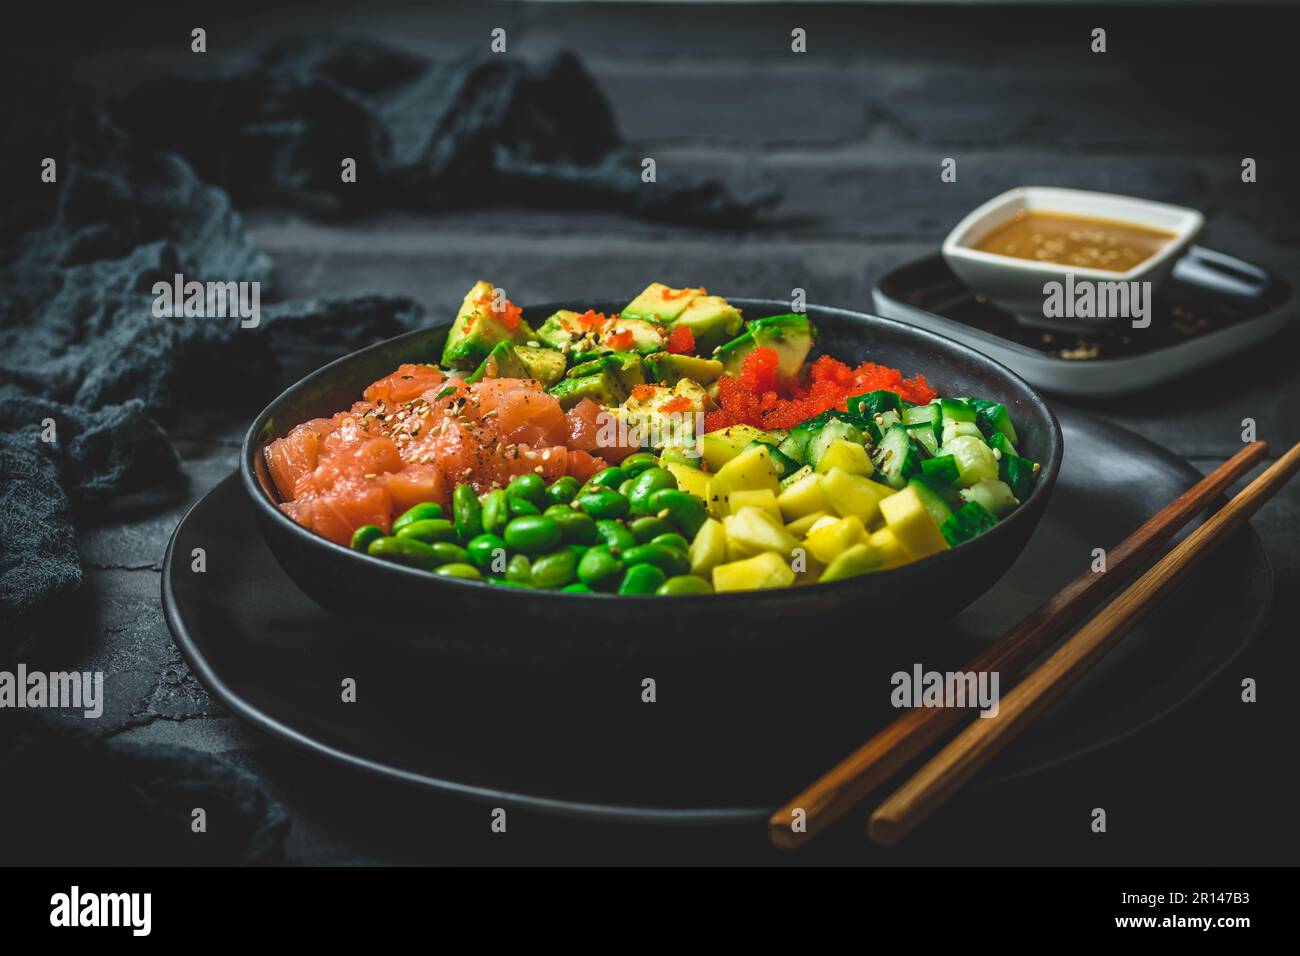 Japanese poke or buddha bowl with salmon, avocado, roe, mango, pies and cucumber in a black bowl on black background Stock Photo